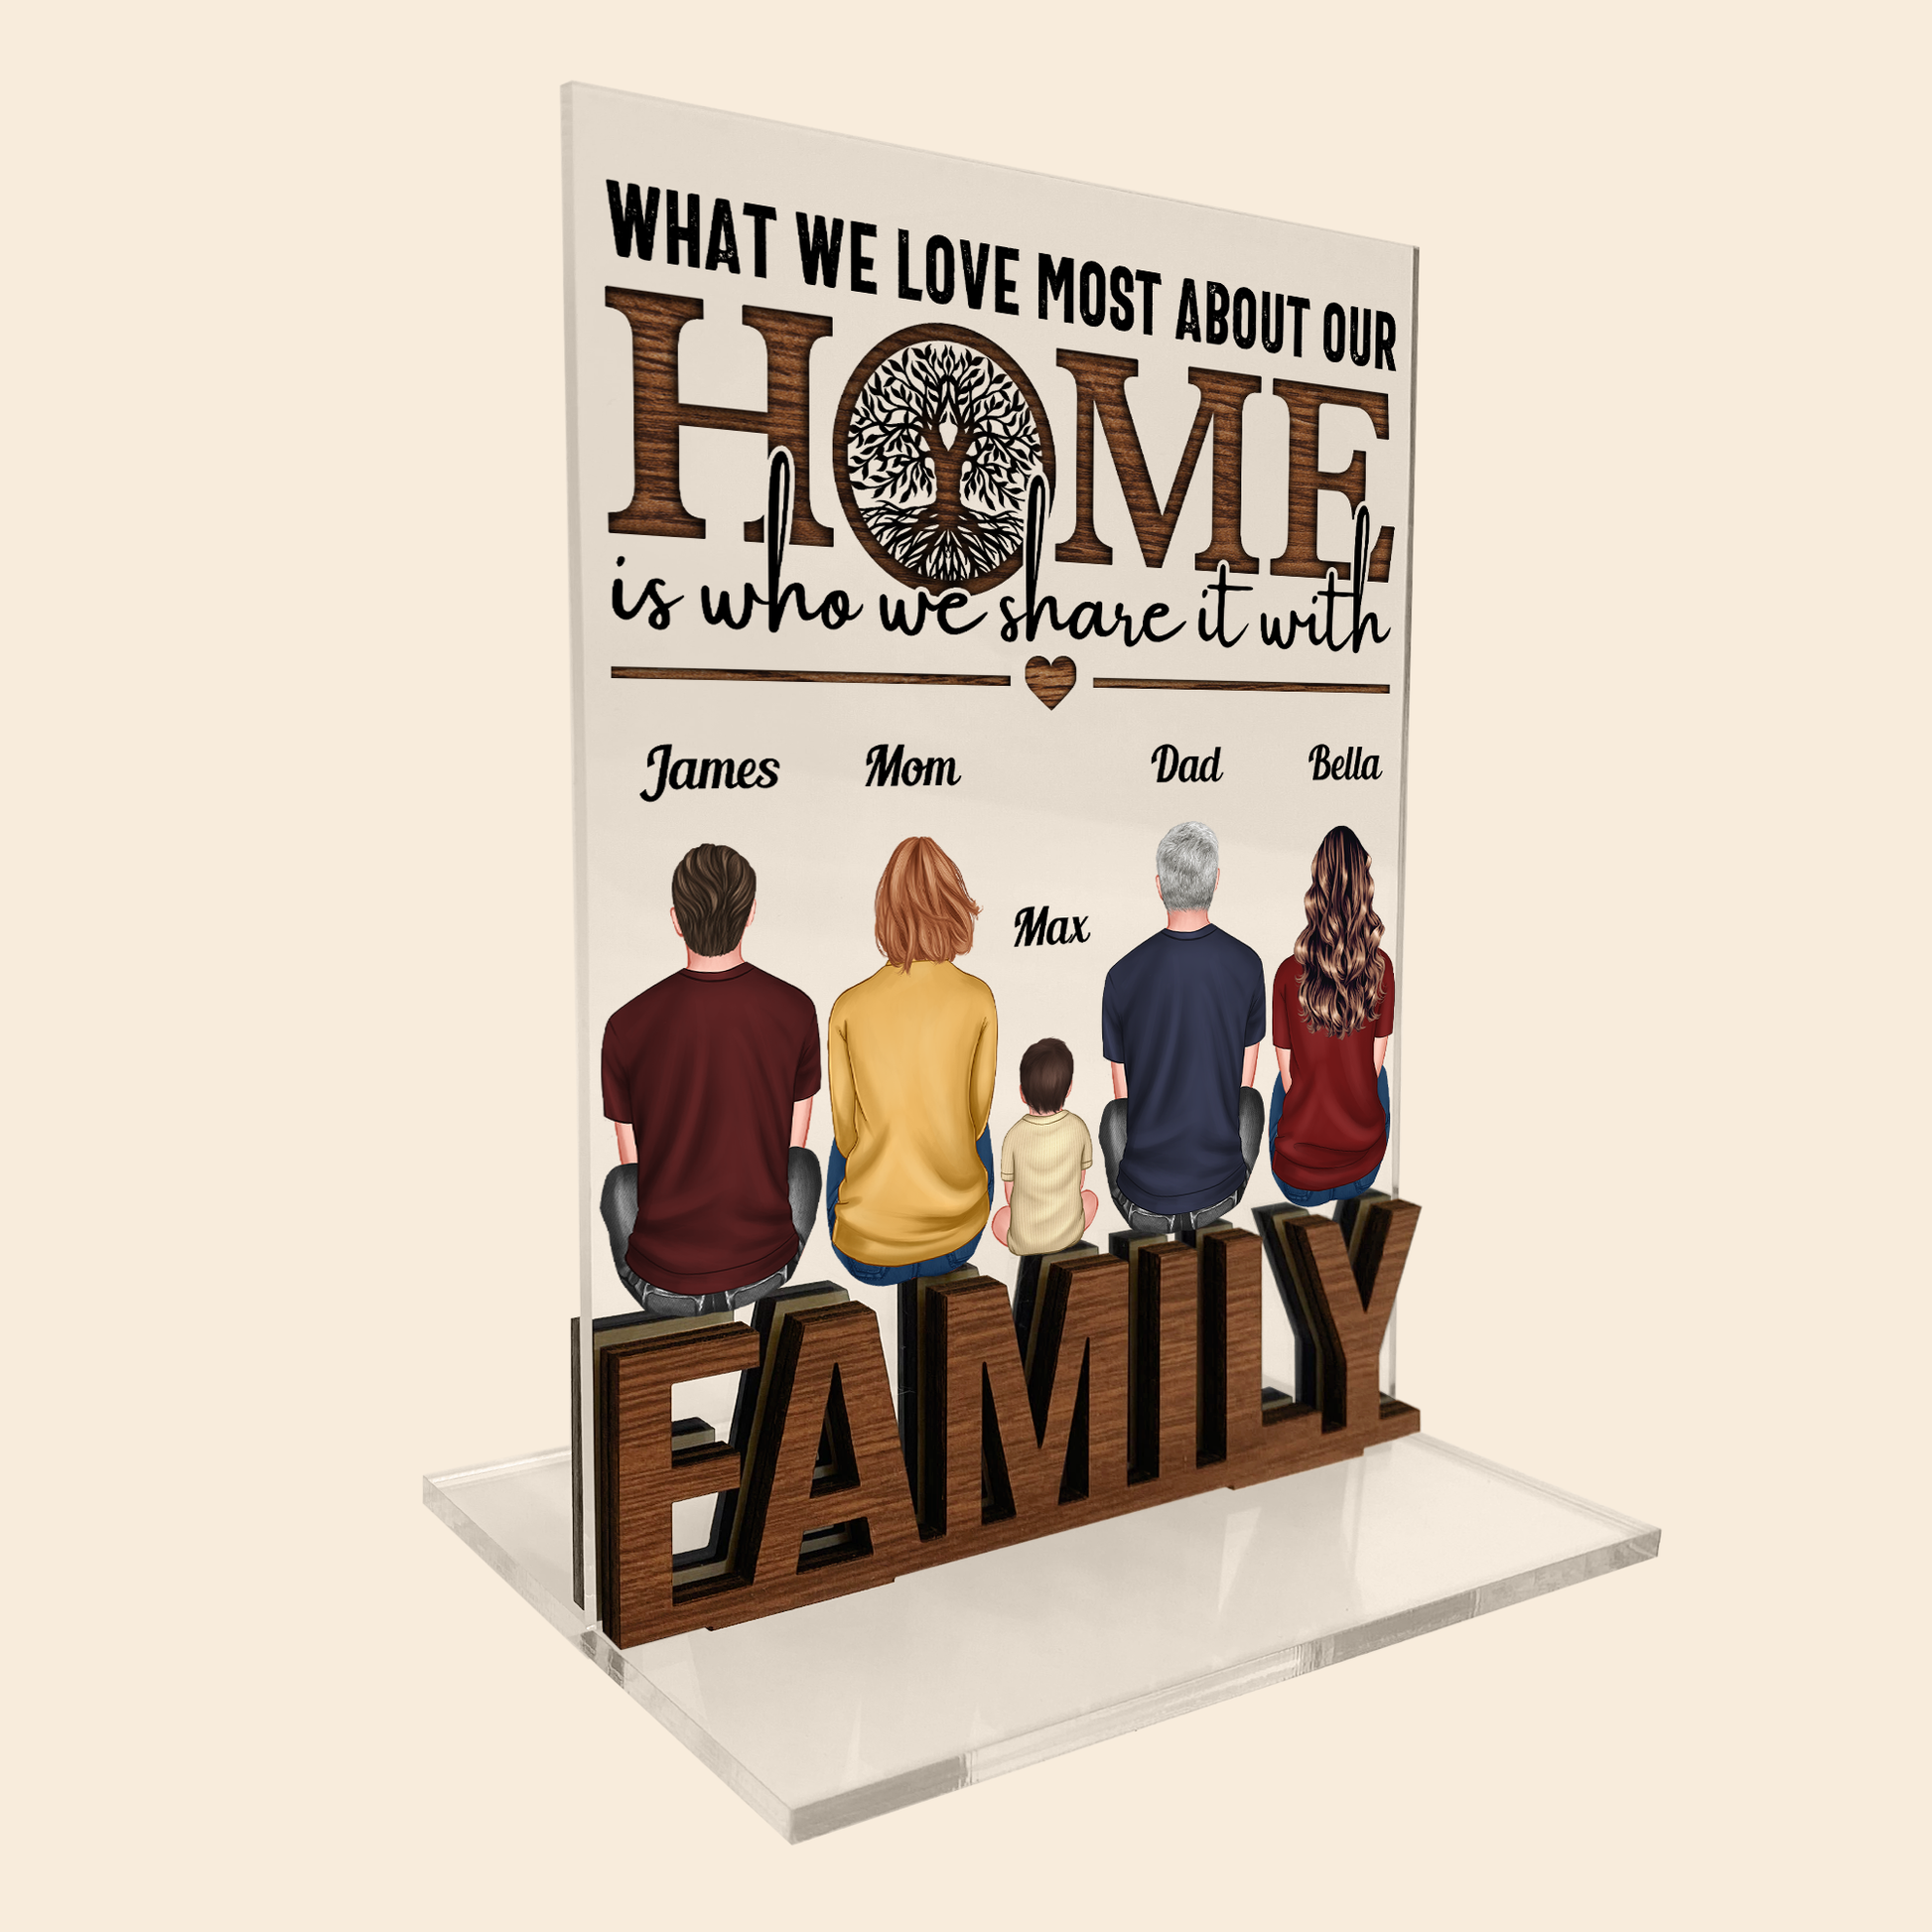 Our Home Is Who We Share It With - Personalized Acrylic Plaque With Standing Wood Letters - Birthday, Heartwarming Gift For Dad, Papa, Mom, Grandparents, Family Members